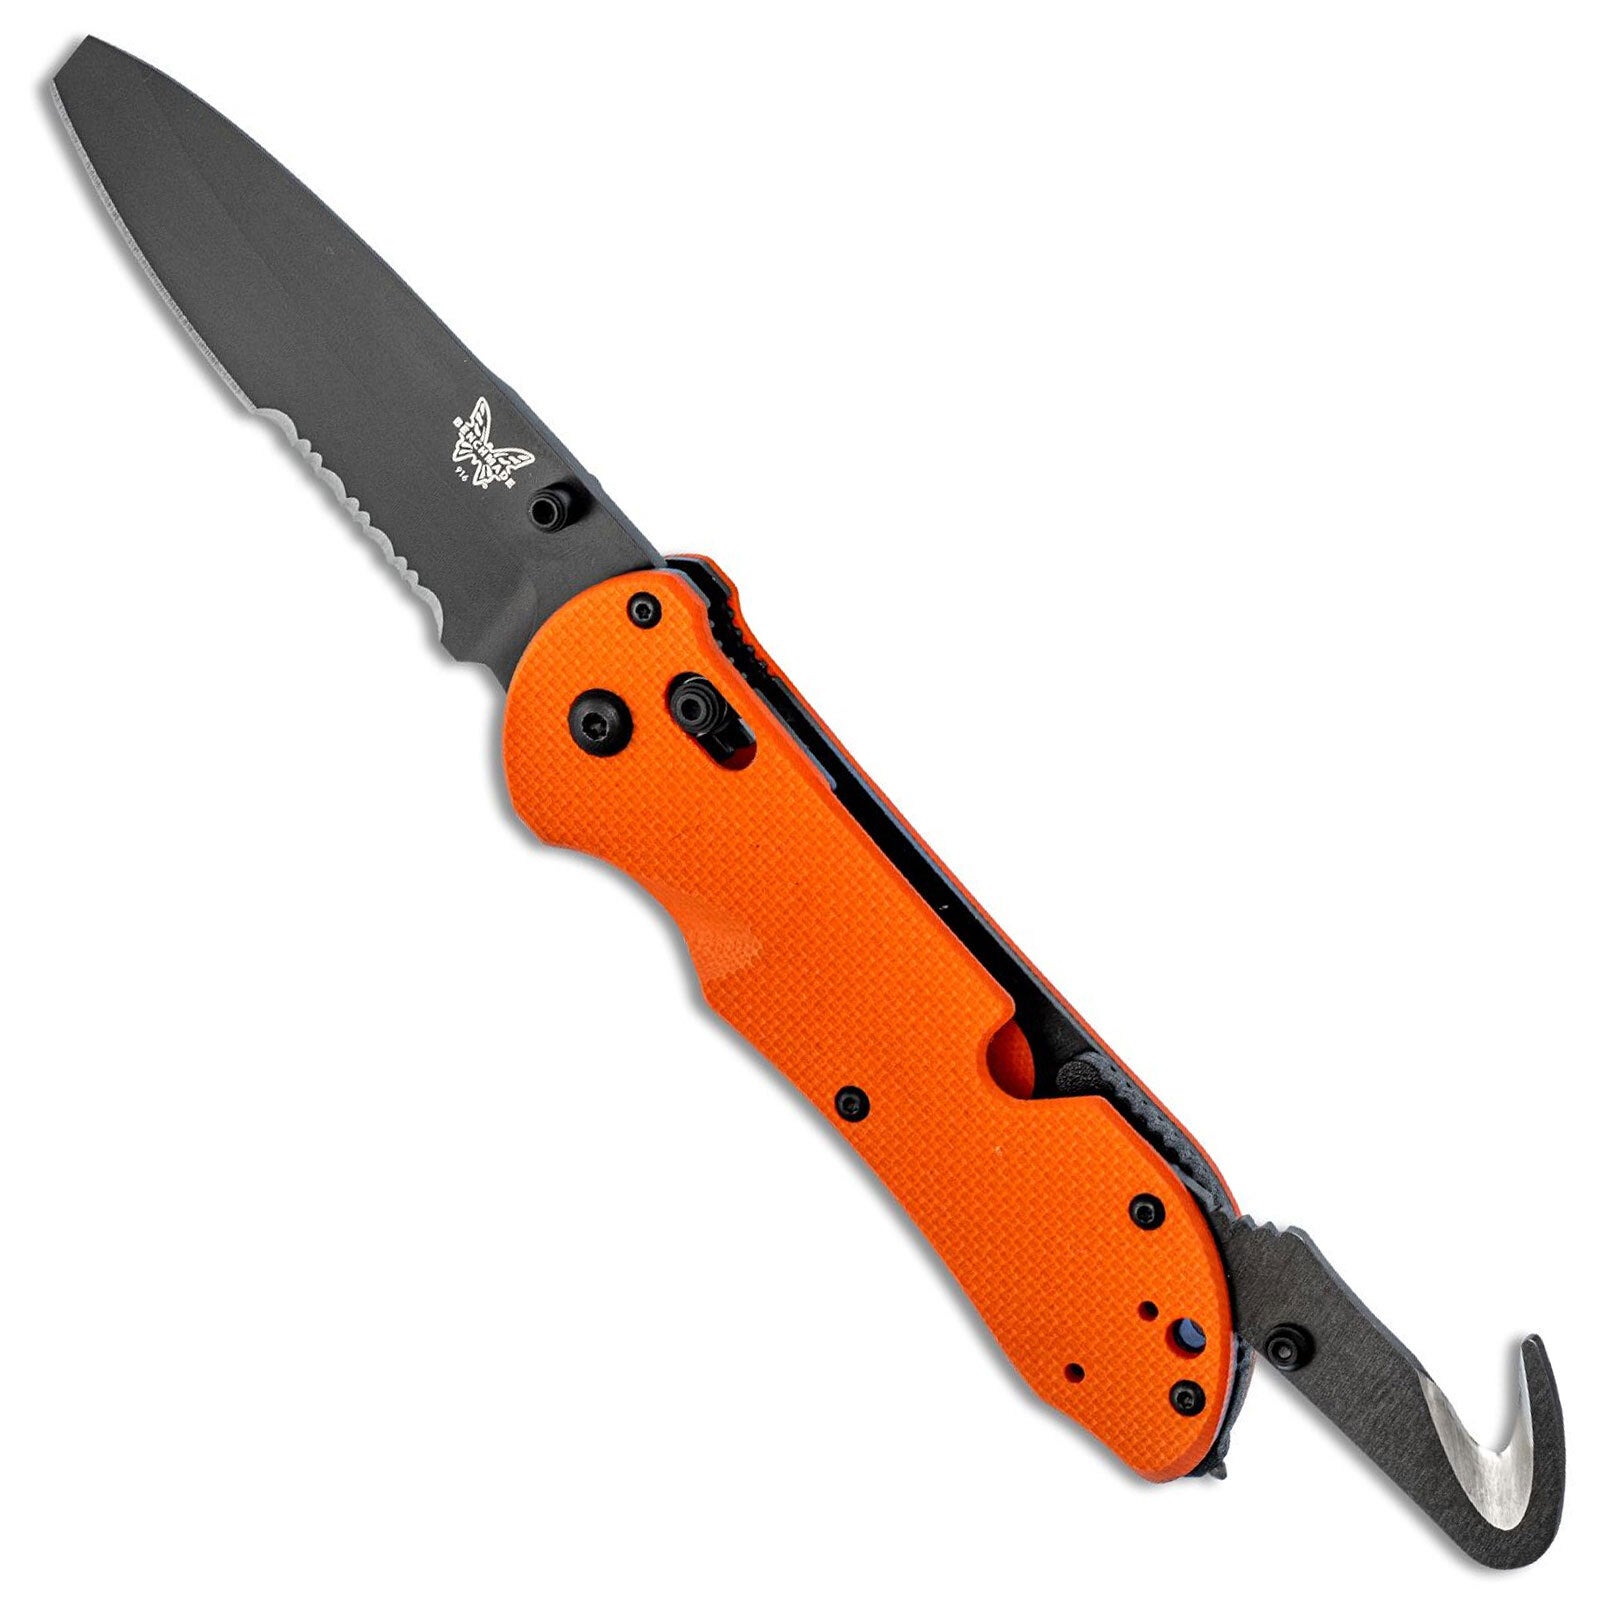 Benchmade Triage Serrated AXIS Lock Folding Knife with Hook - Orange / Black